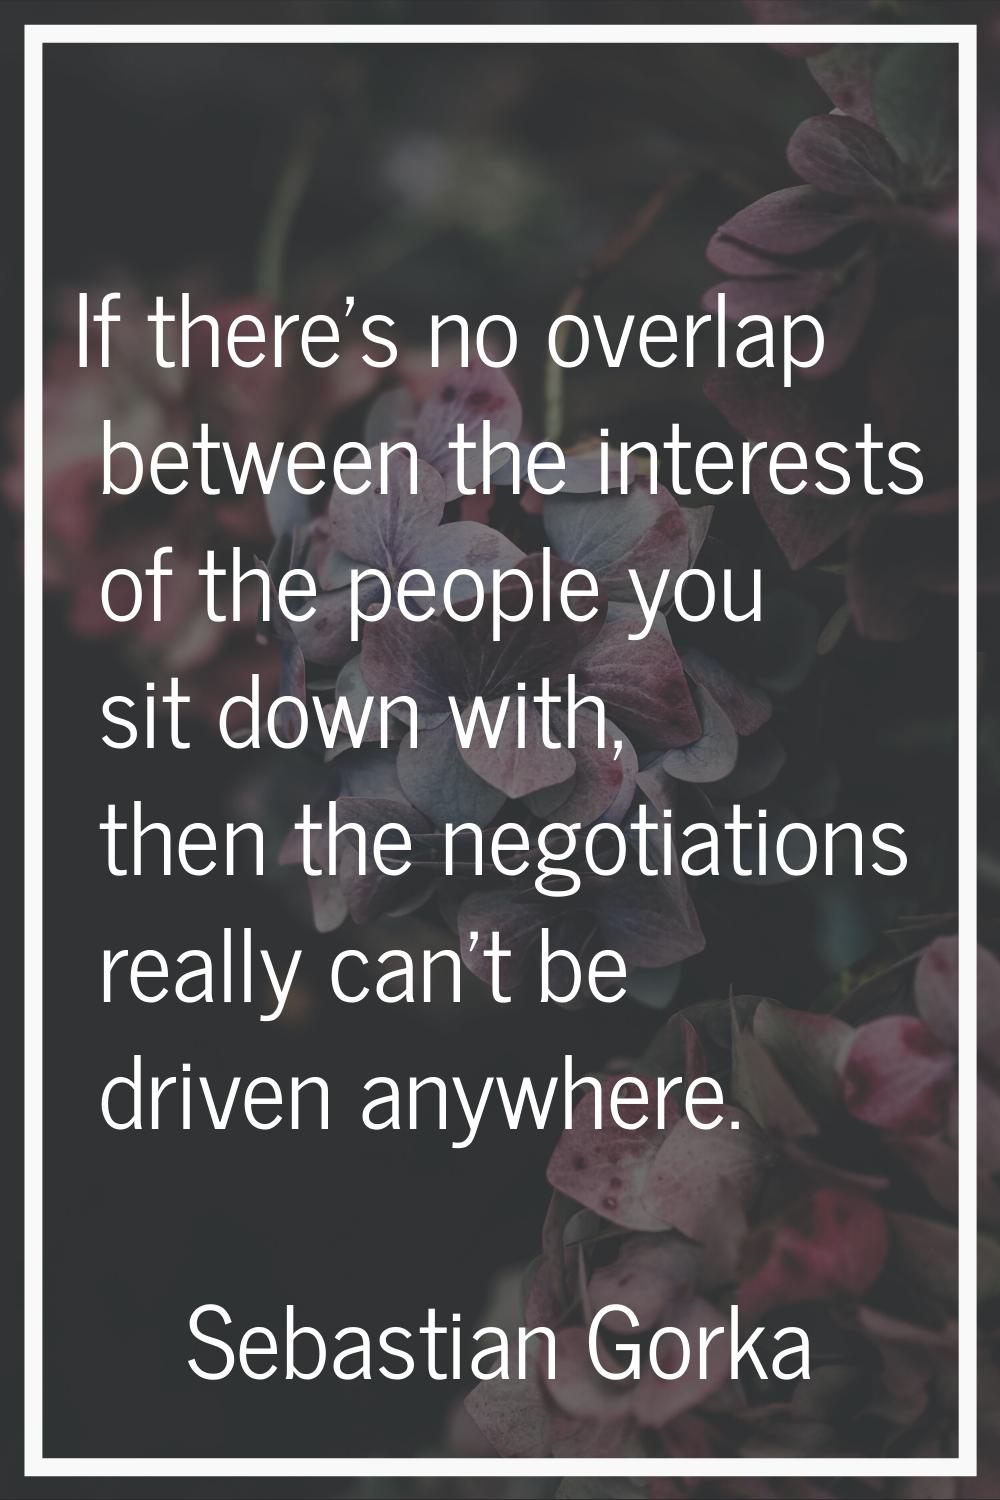 If there's no overlap between the interests of the people you sit down with, then the negotiations 